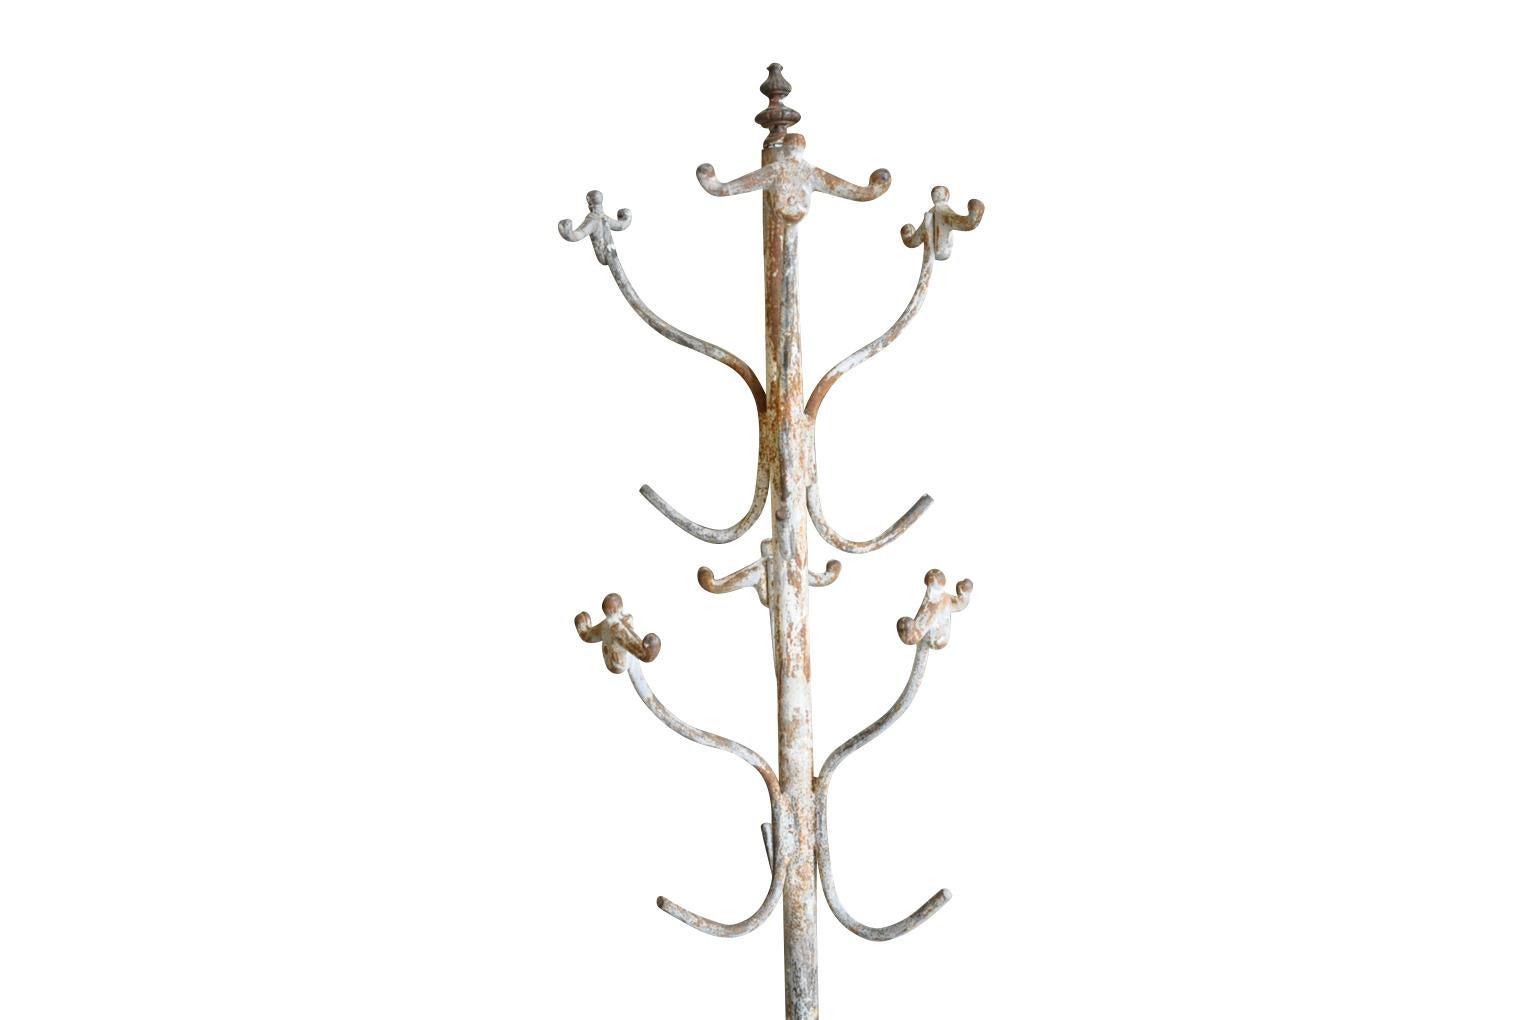 A charming early 20th century Italian coat rack in painted metal. A wonderful accessory for any home, store or business.